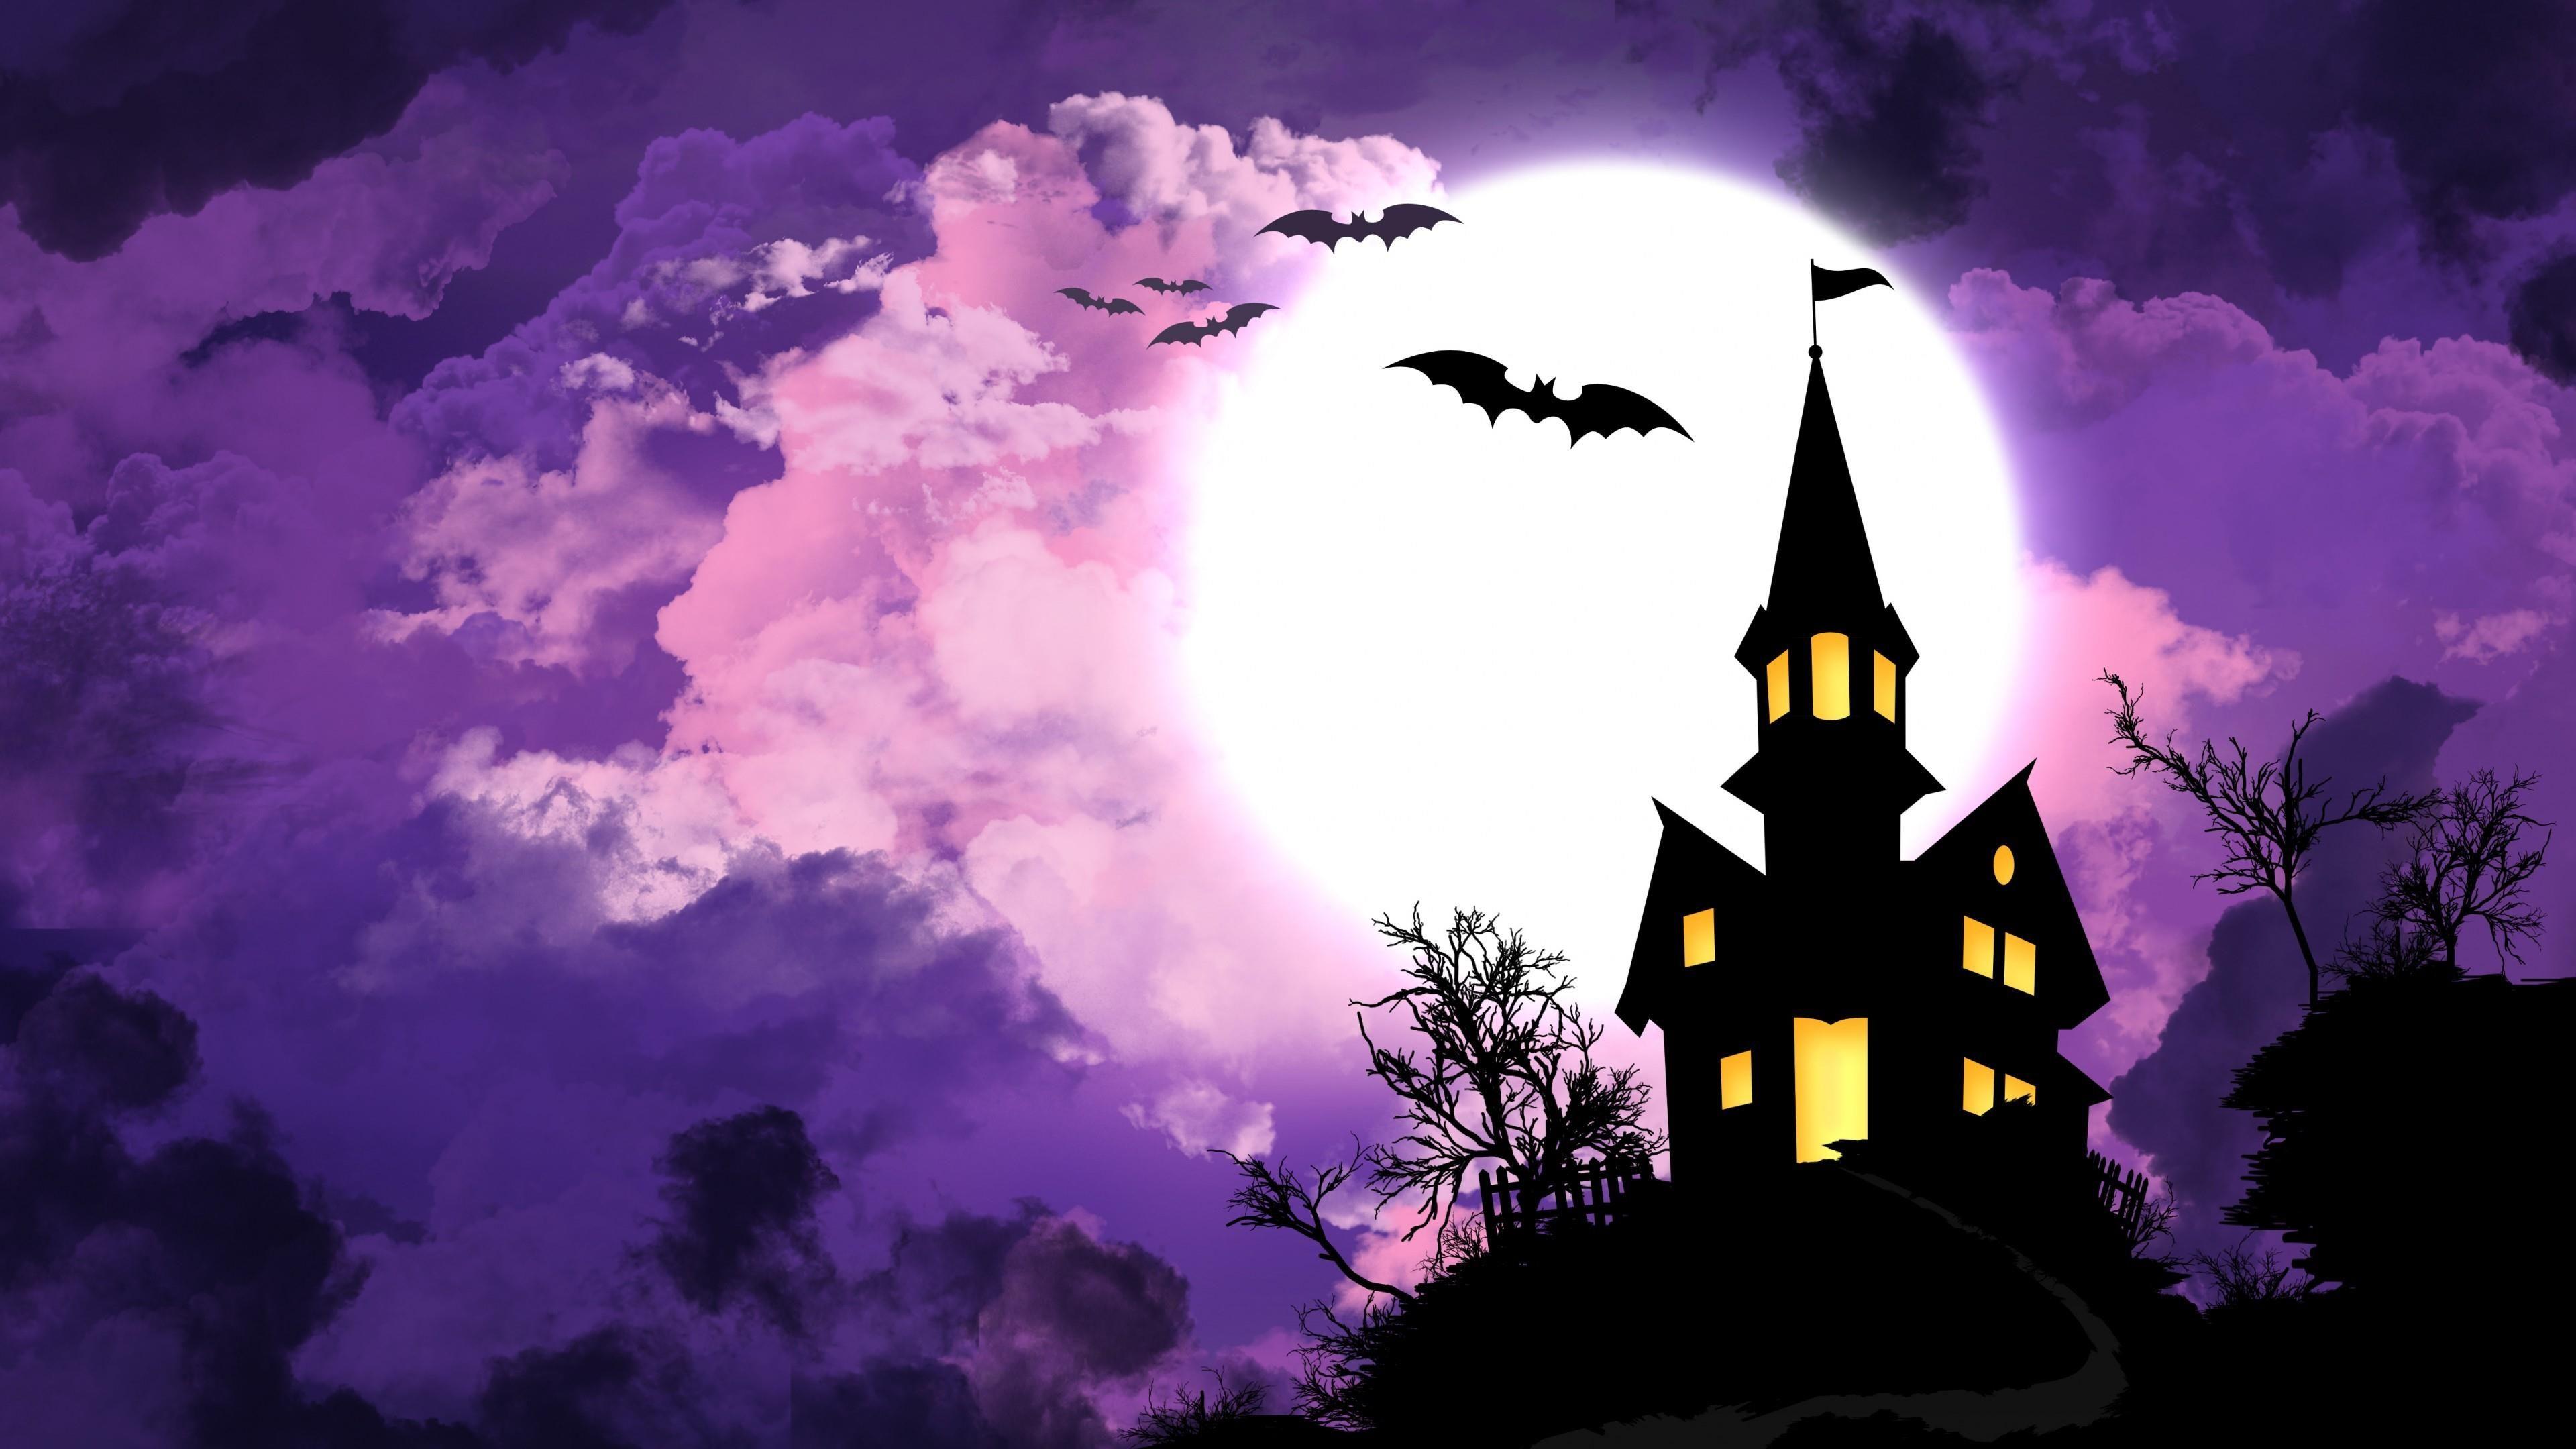 Haunted House With Bats Illustration Wallpaper